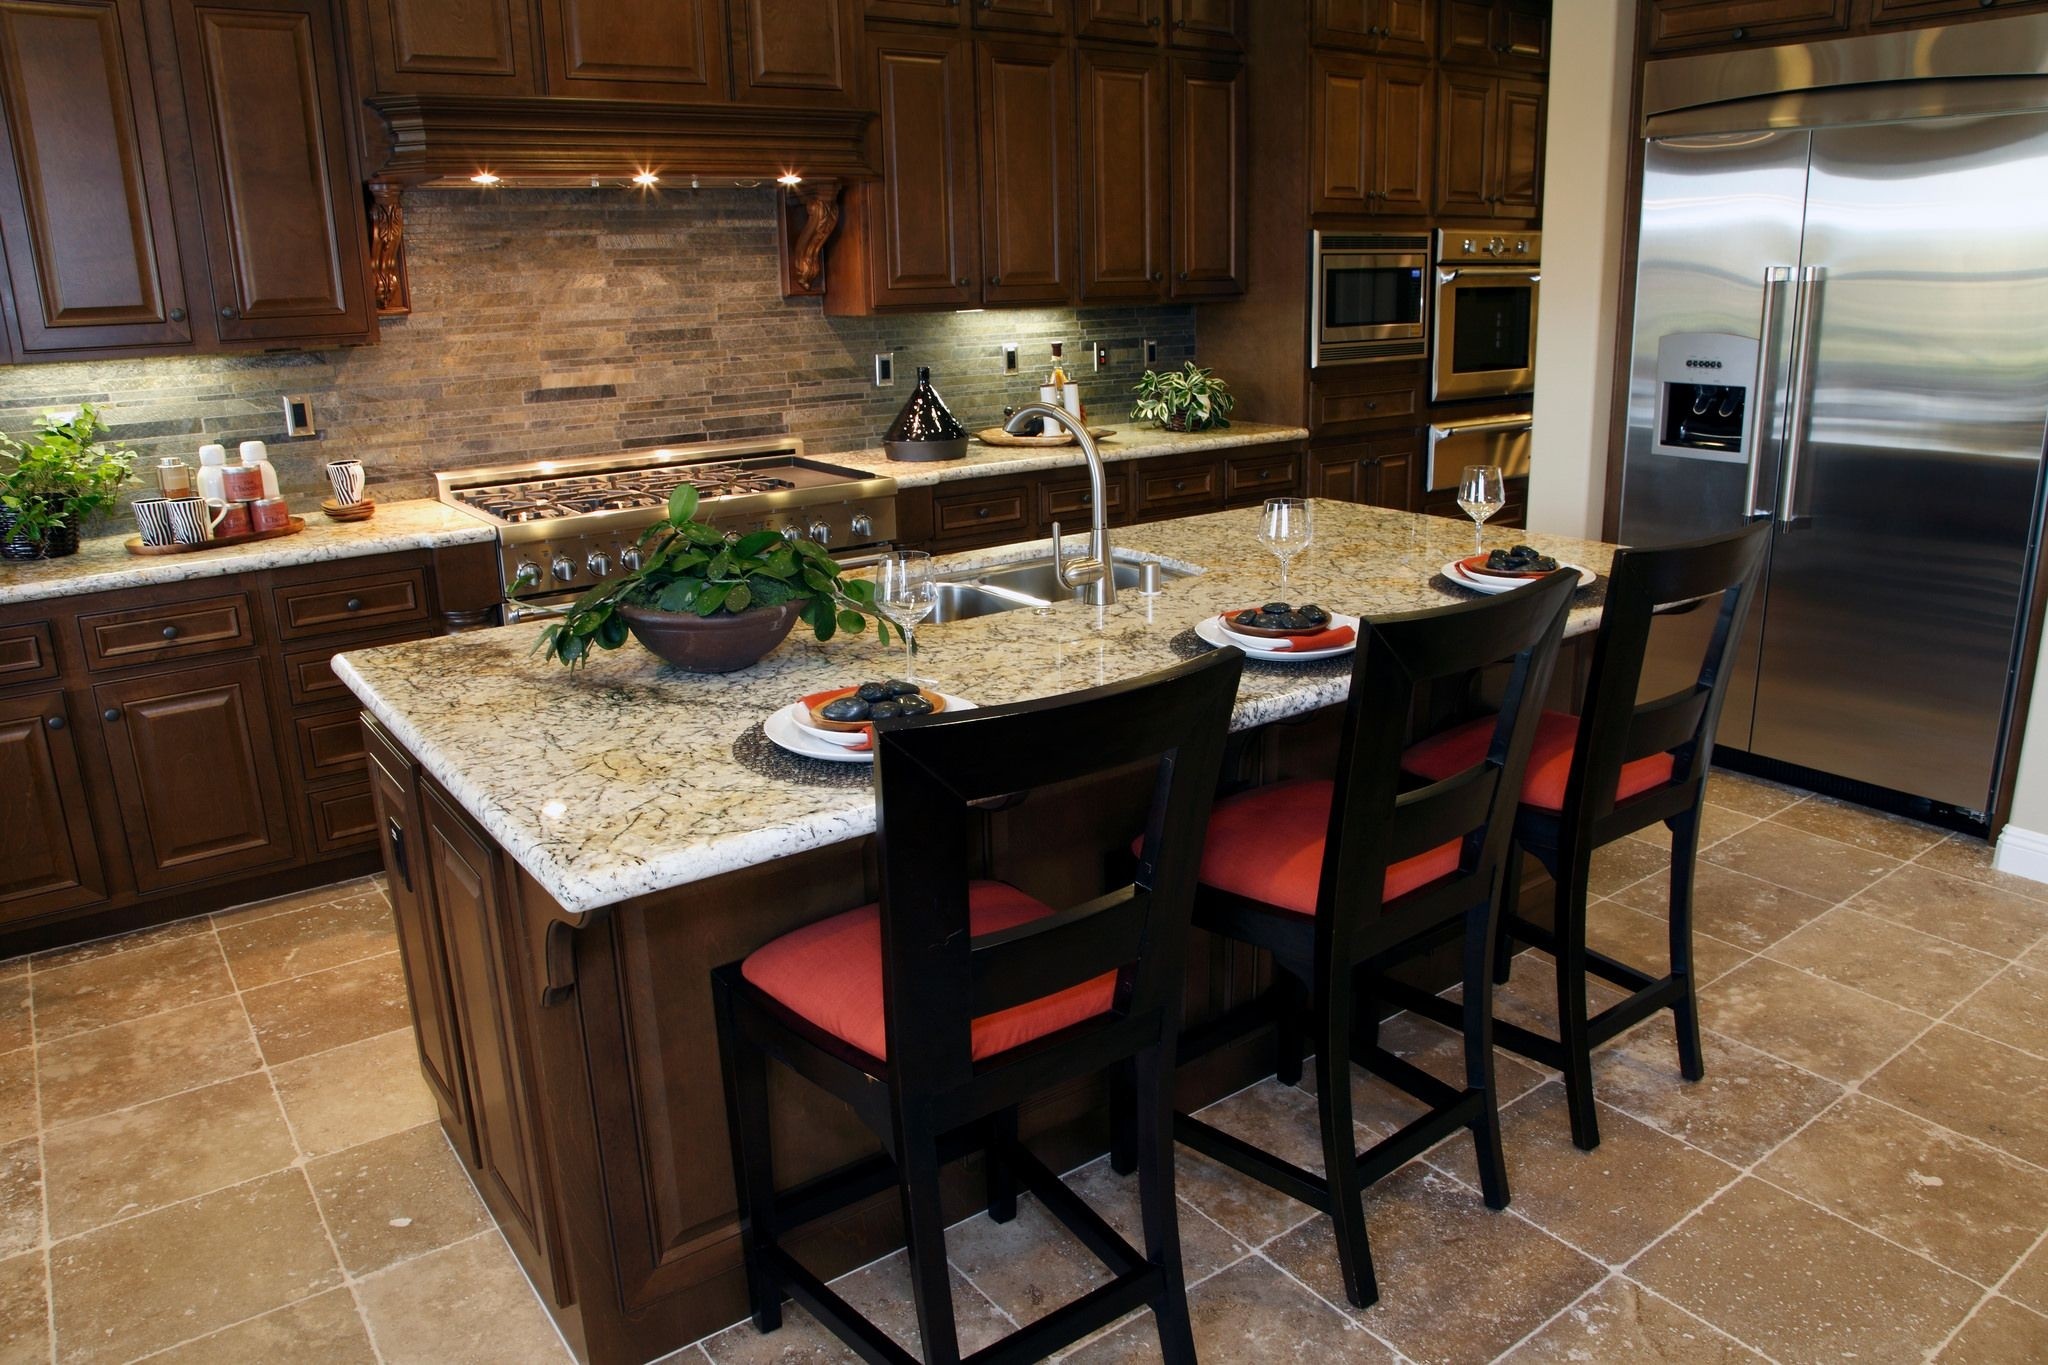 Luxury kitchen with dark wood cabinets an island that seats